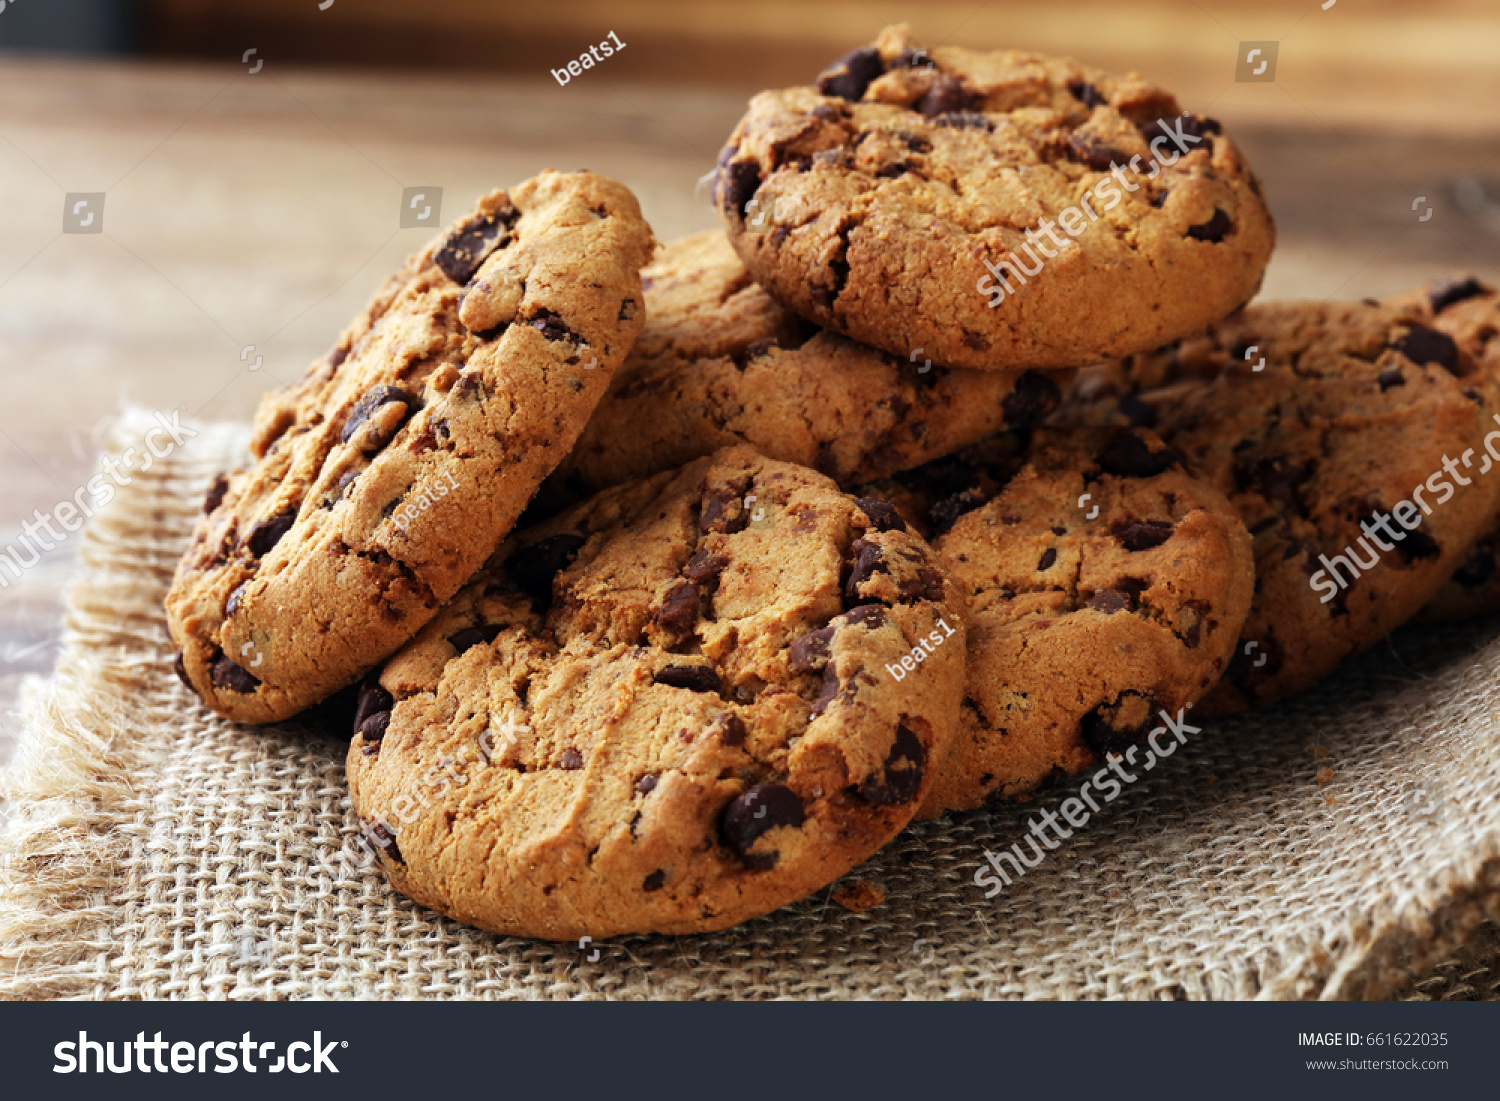 Chocolate cookies on wooden table.   #661622035